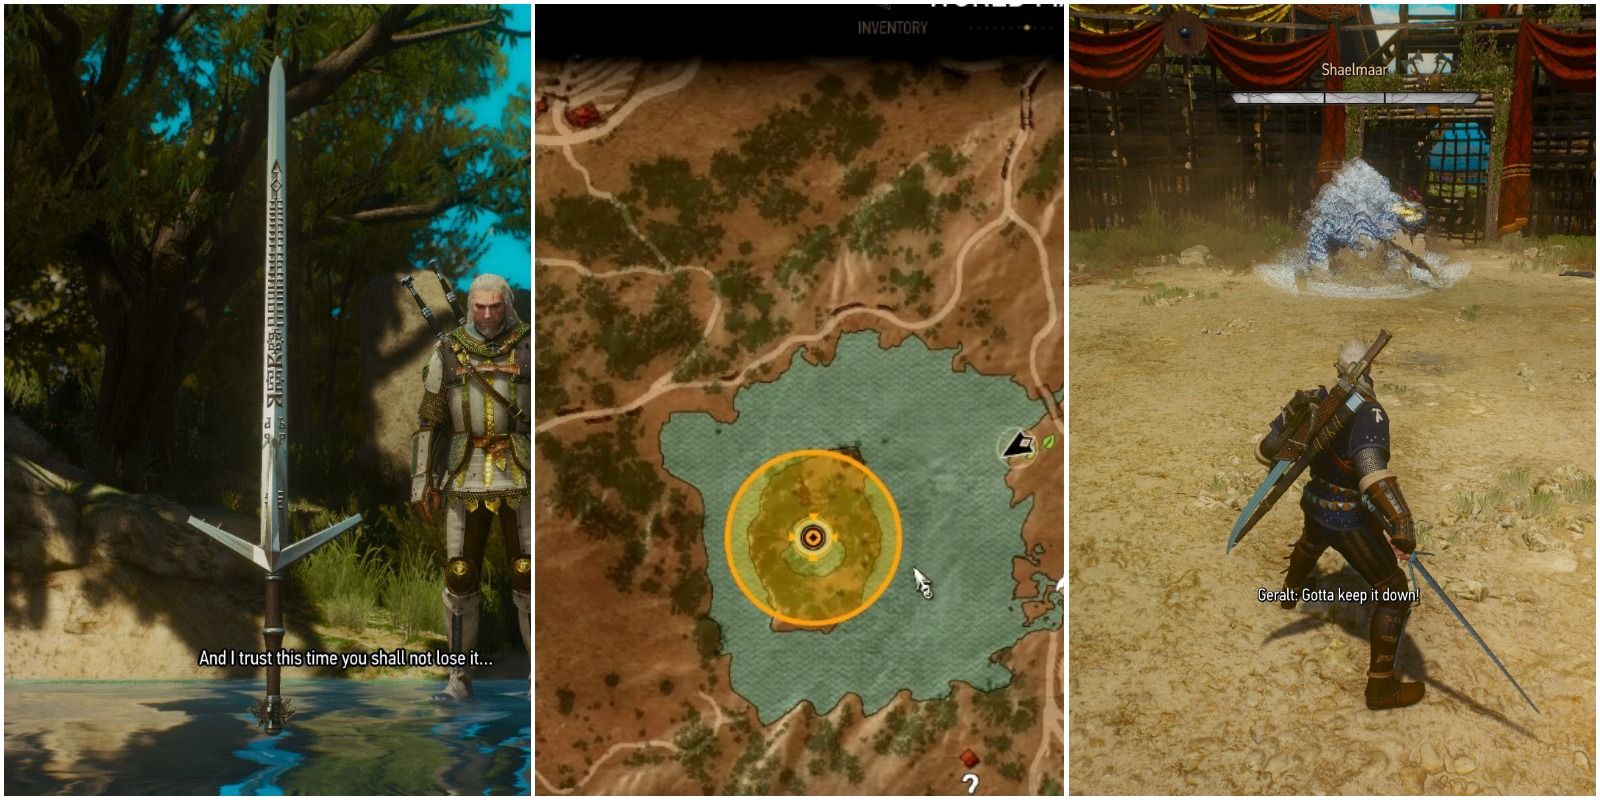 THE WITHCHER 3 WILD HUNT QUEST KING'S GAMBIT LOCATION FIND PLACE OF POWER 